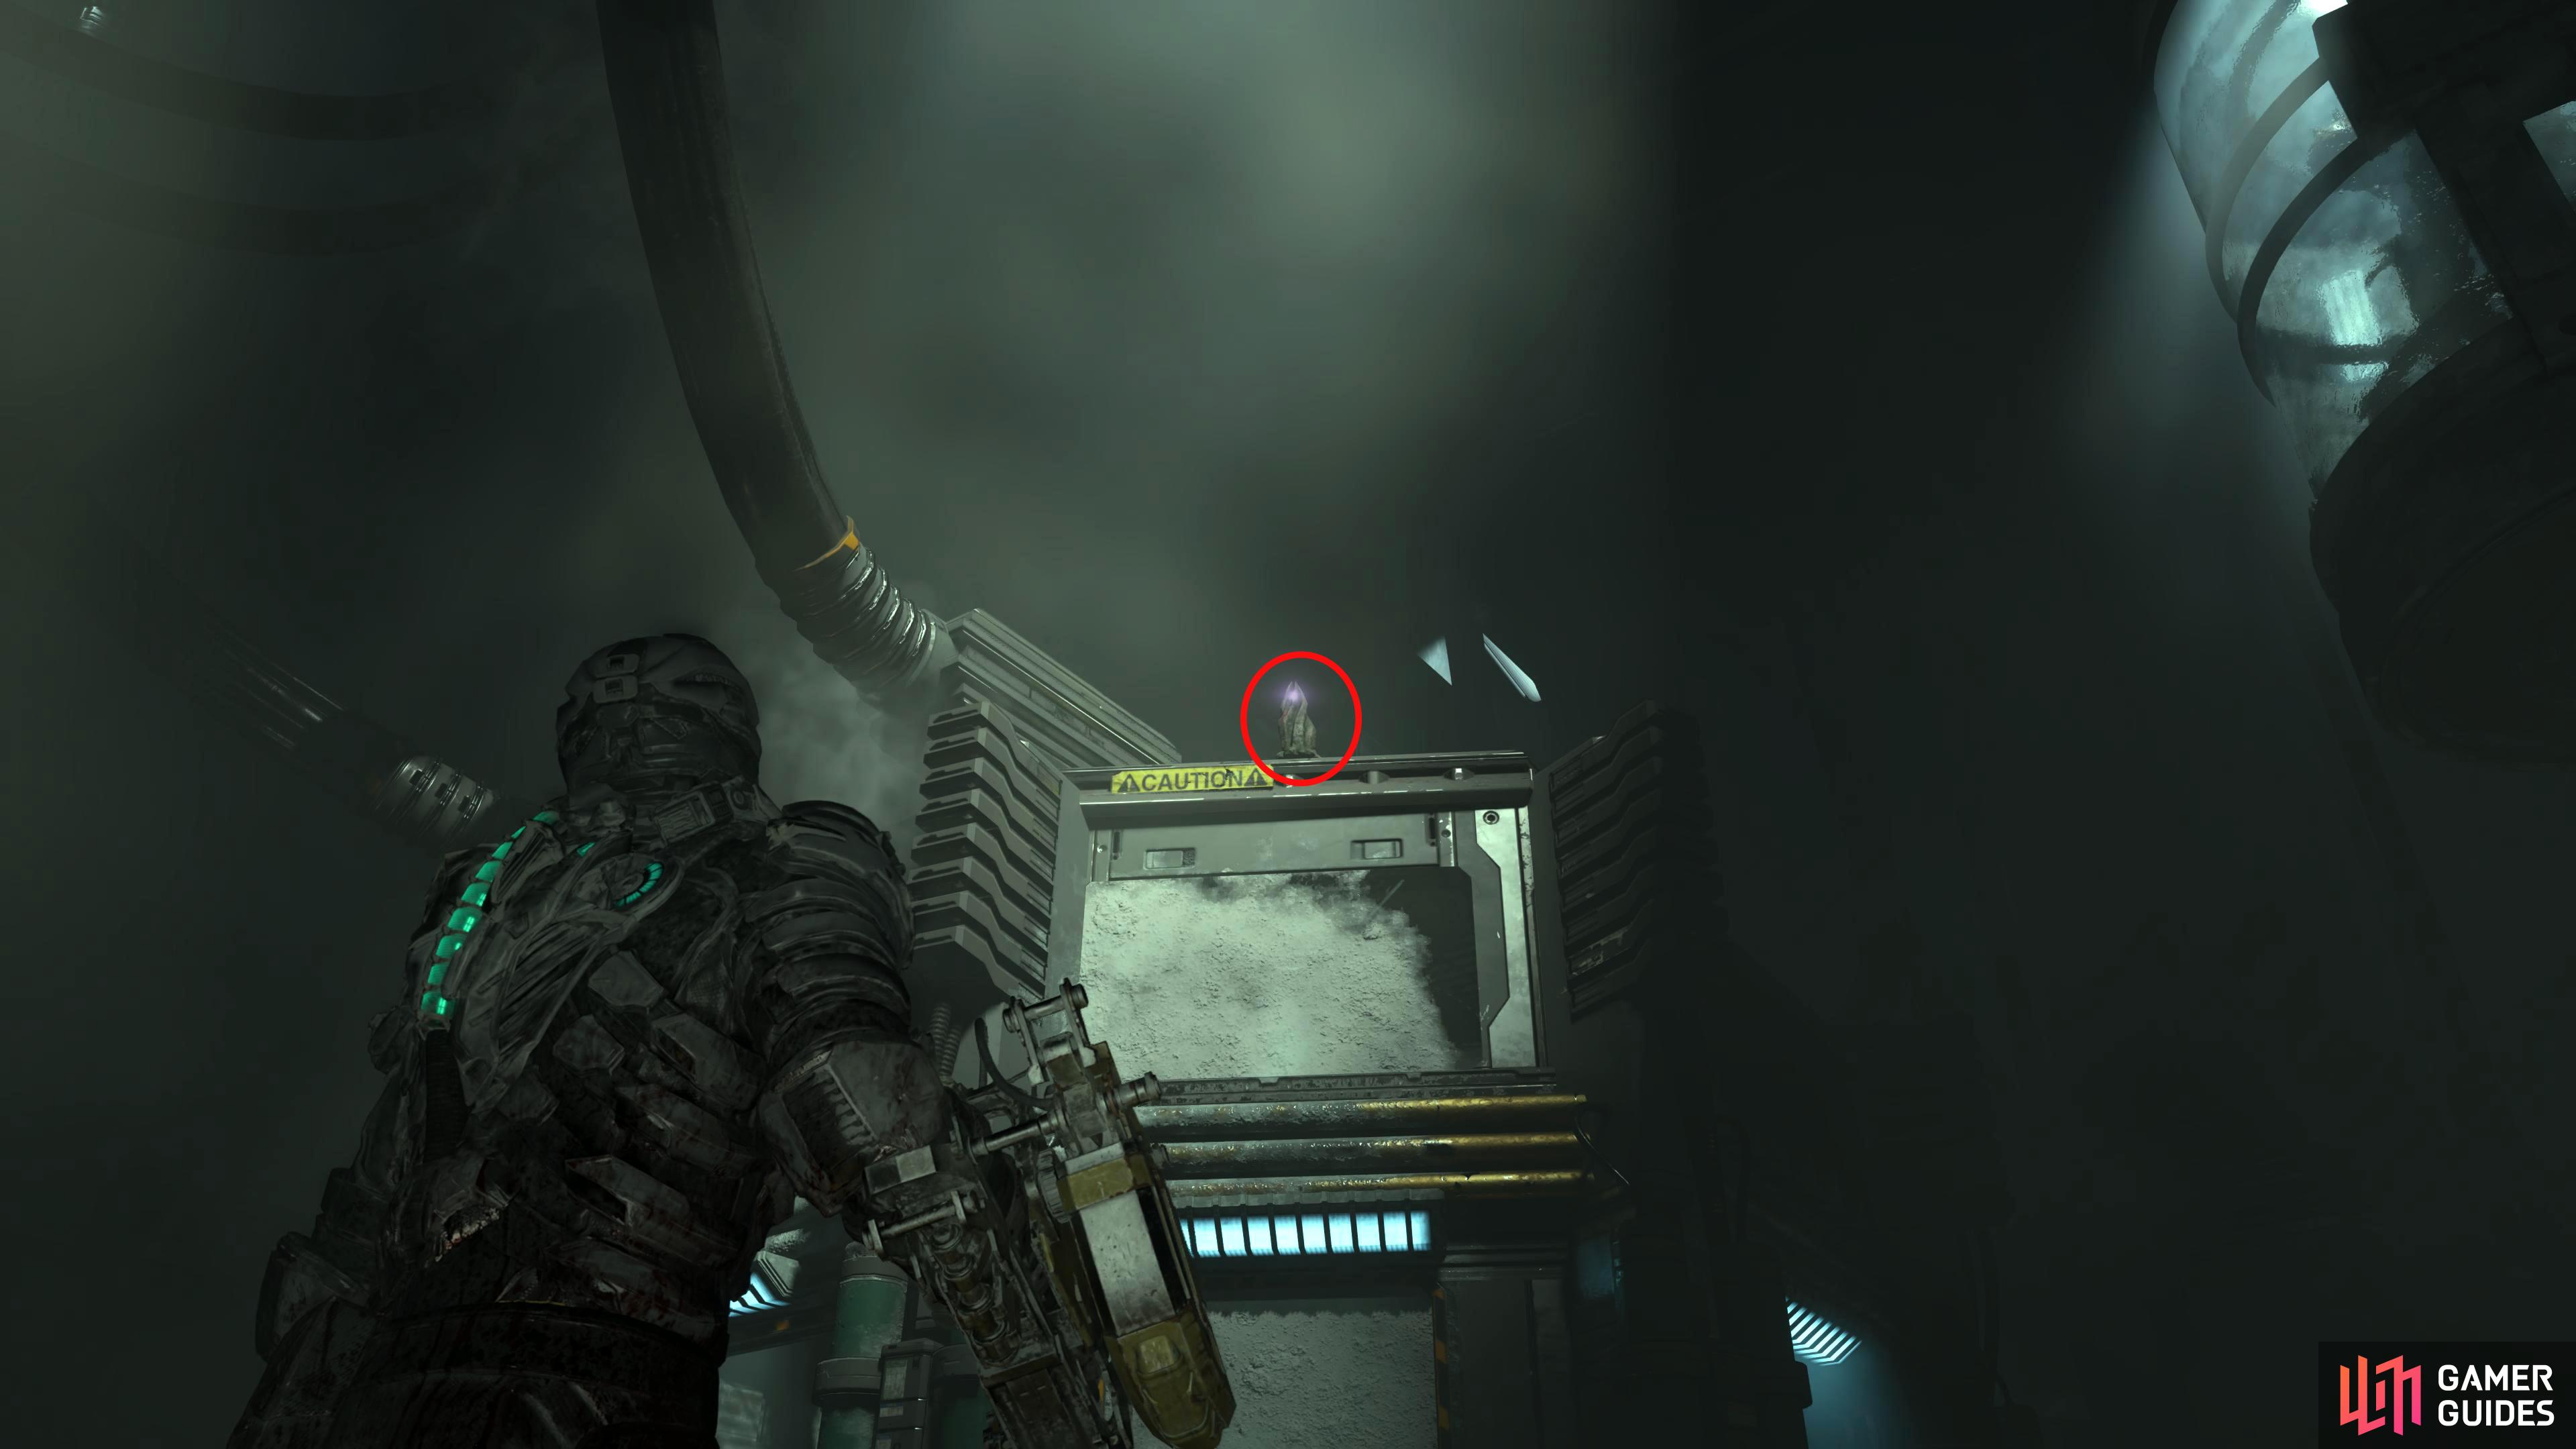 You can find it on top of the Cryogenic Chamber where you killed the Hunter.